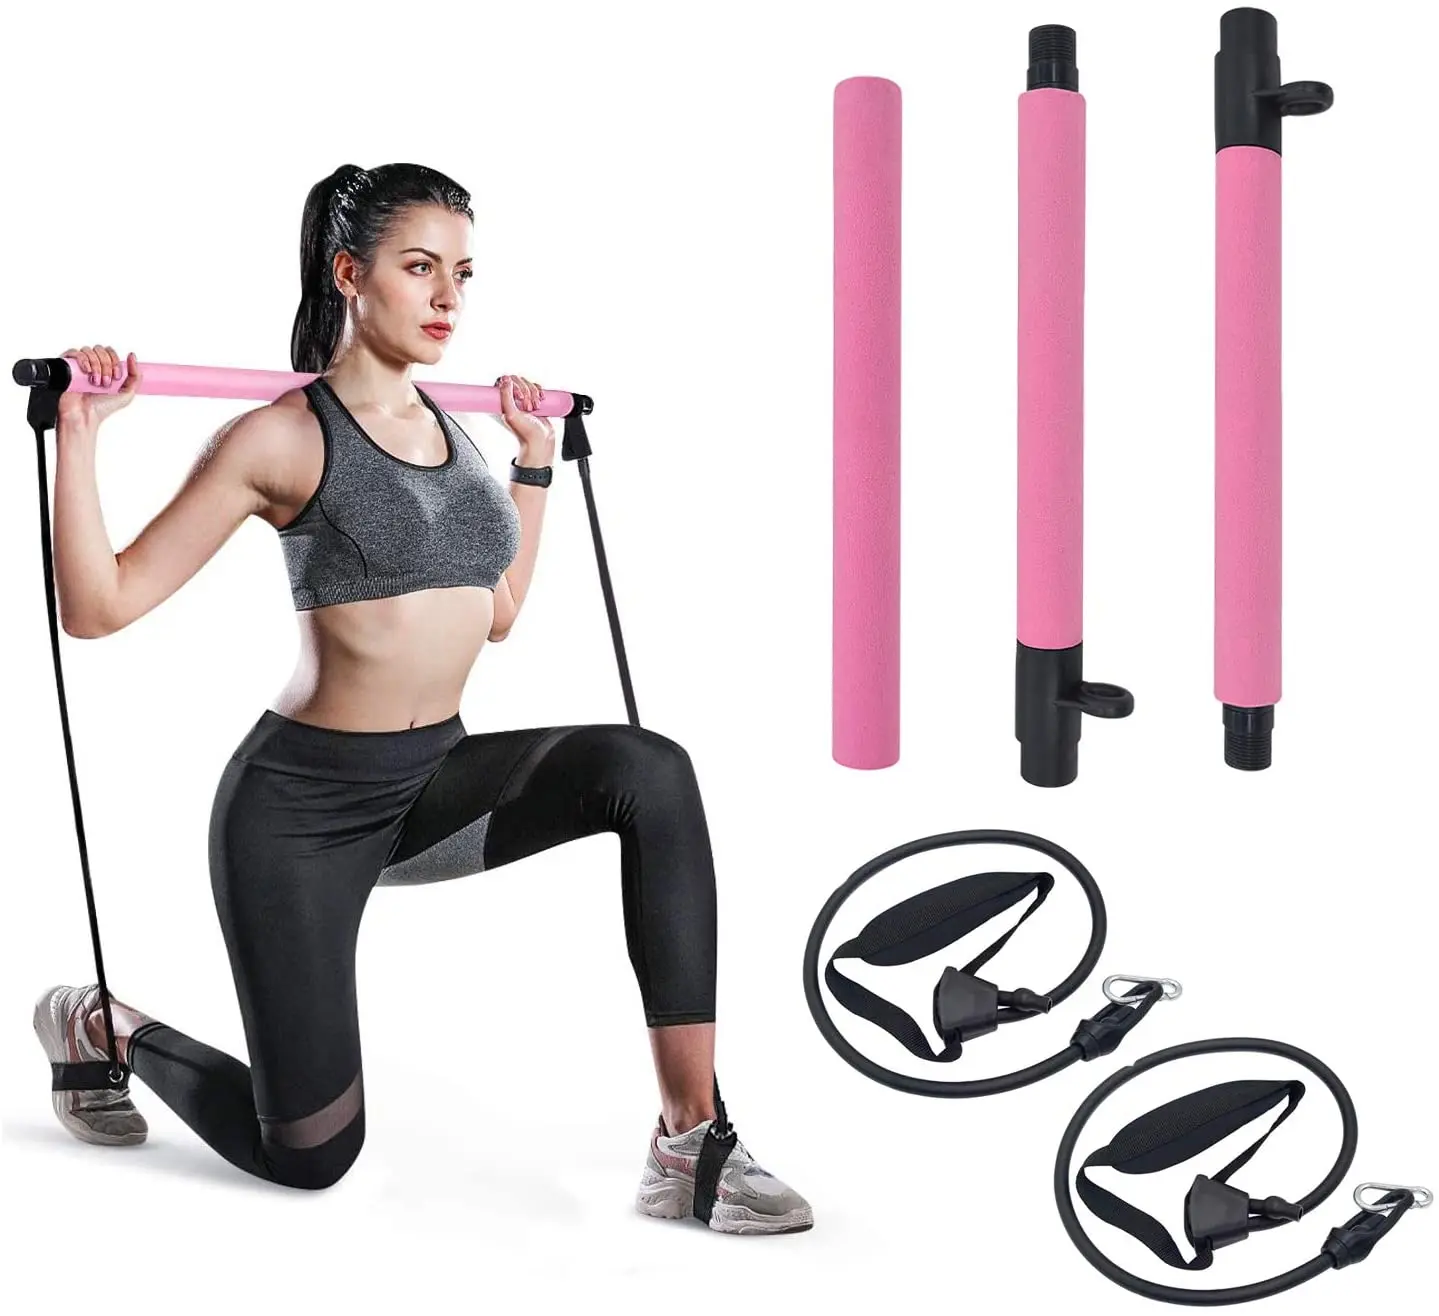 

Portable Pilates Bar Kit with Resistance Band 3-Section Yoga Pilates Stick Muscle Exercise Equipment, Pink,purple,black